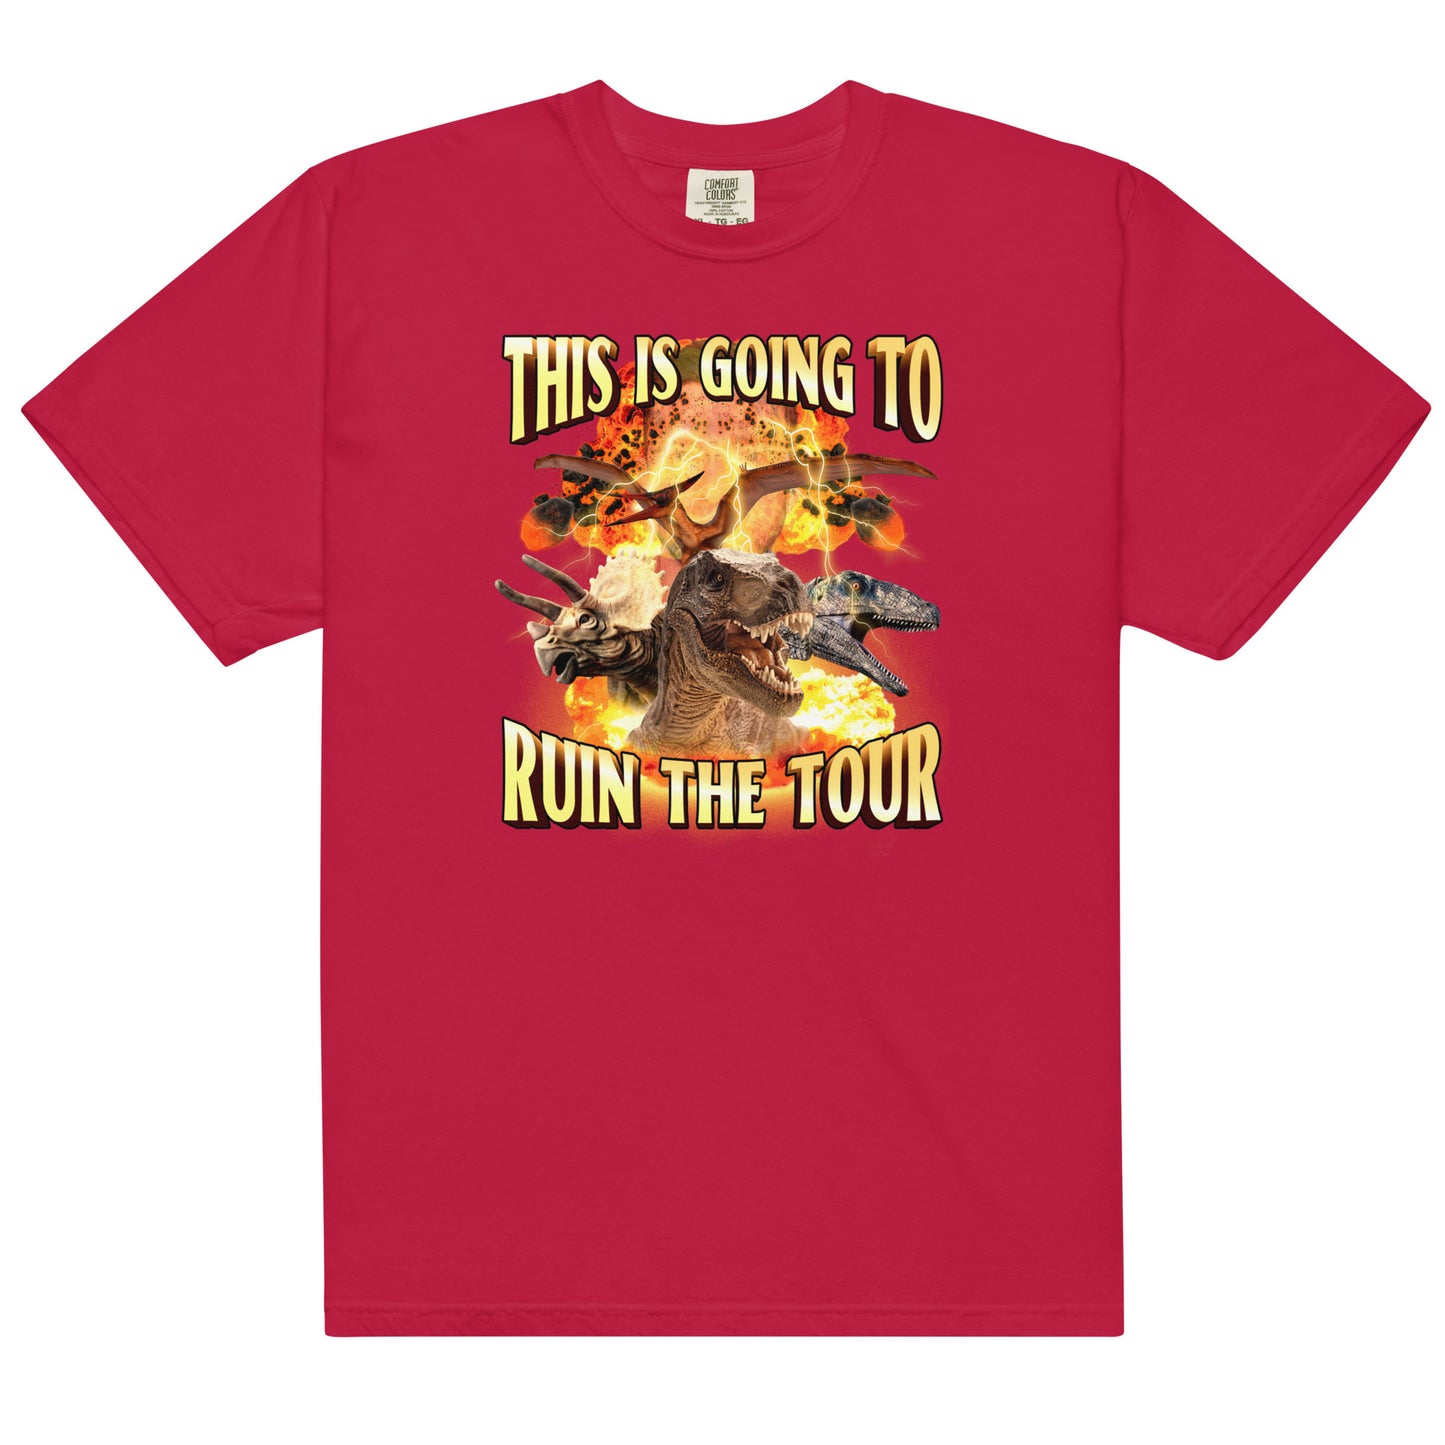 This is Going to Ruin the Tour (Dinosaur) Unisex t-shirt